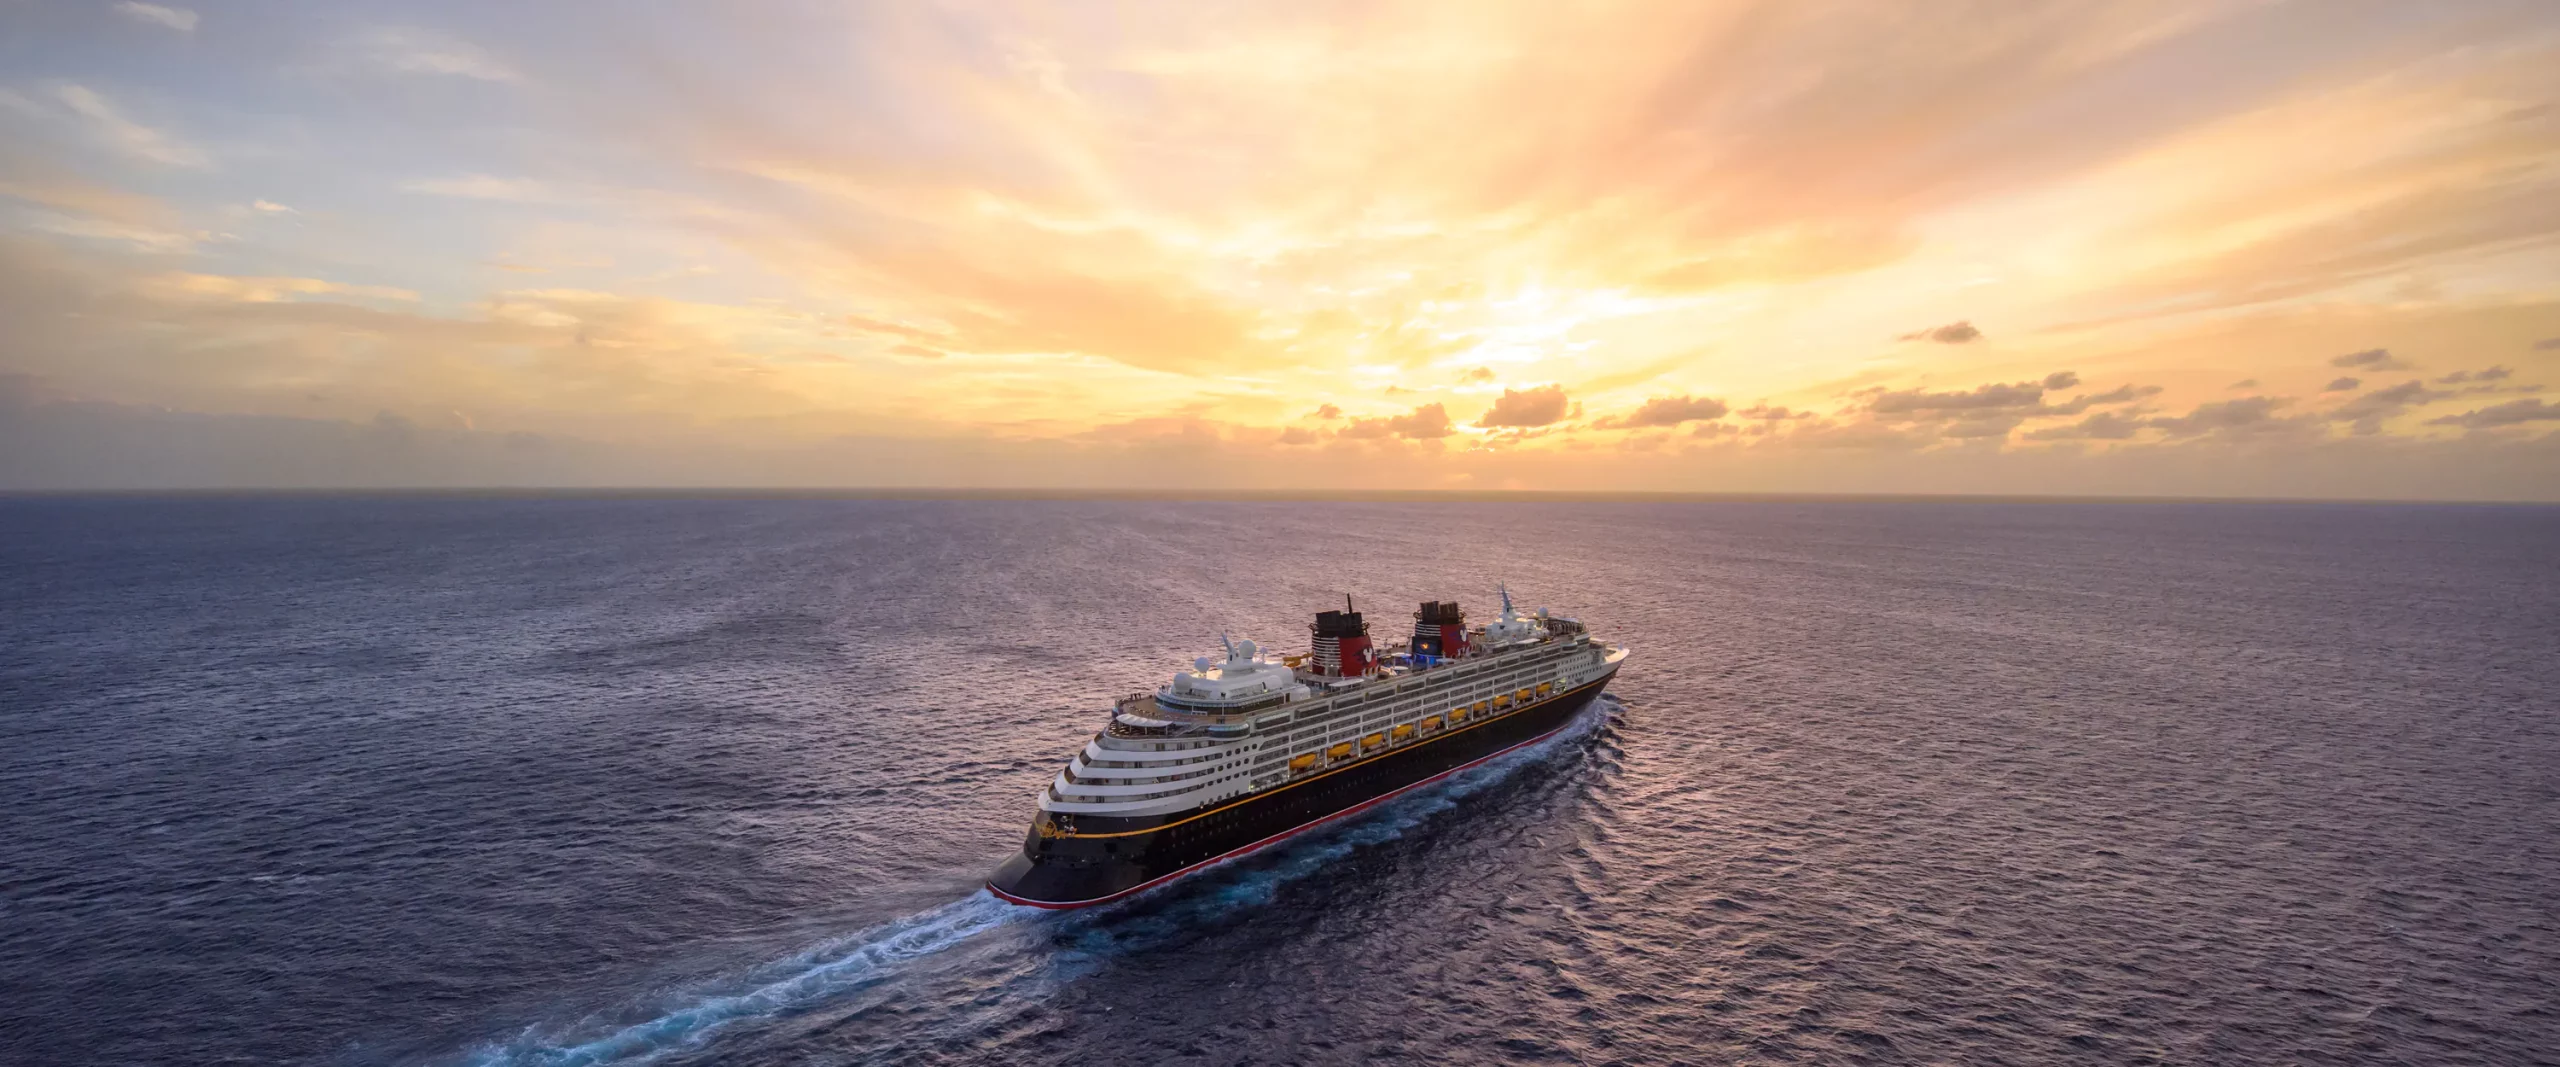 Disney Cruise South Pacific